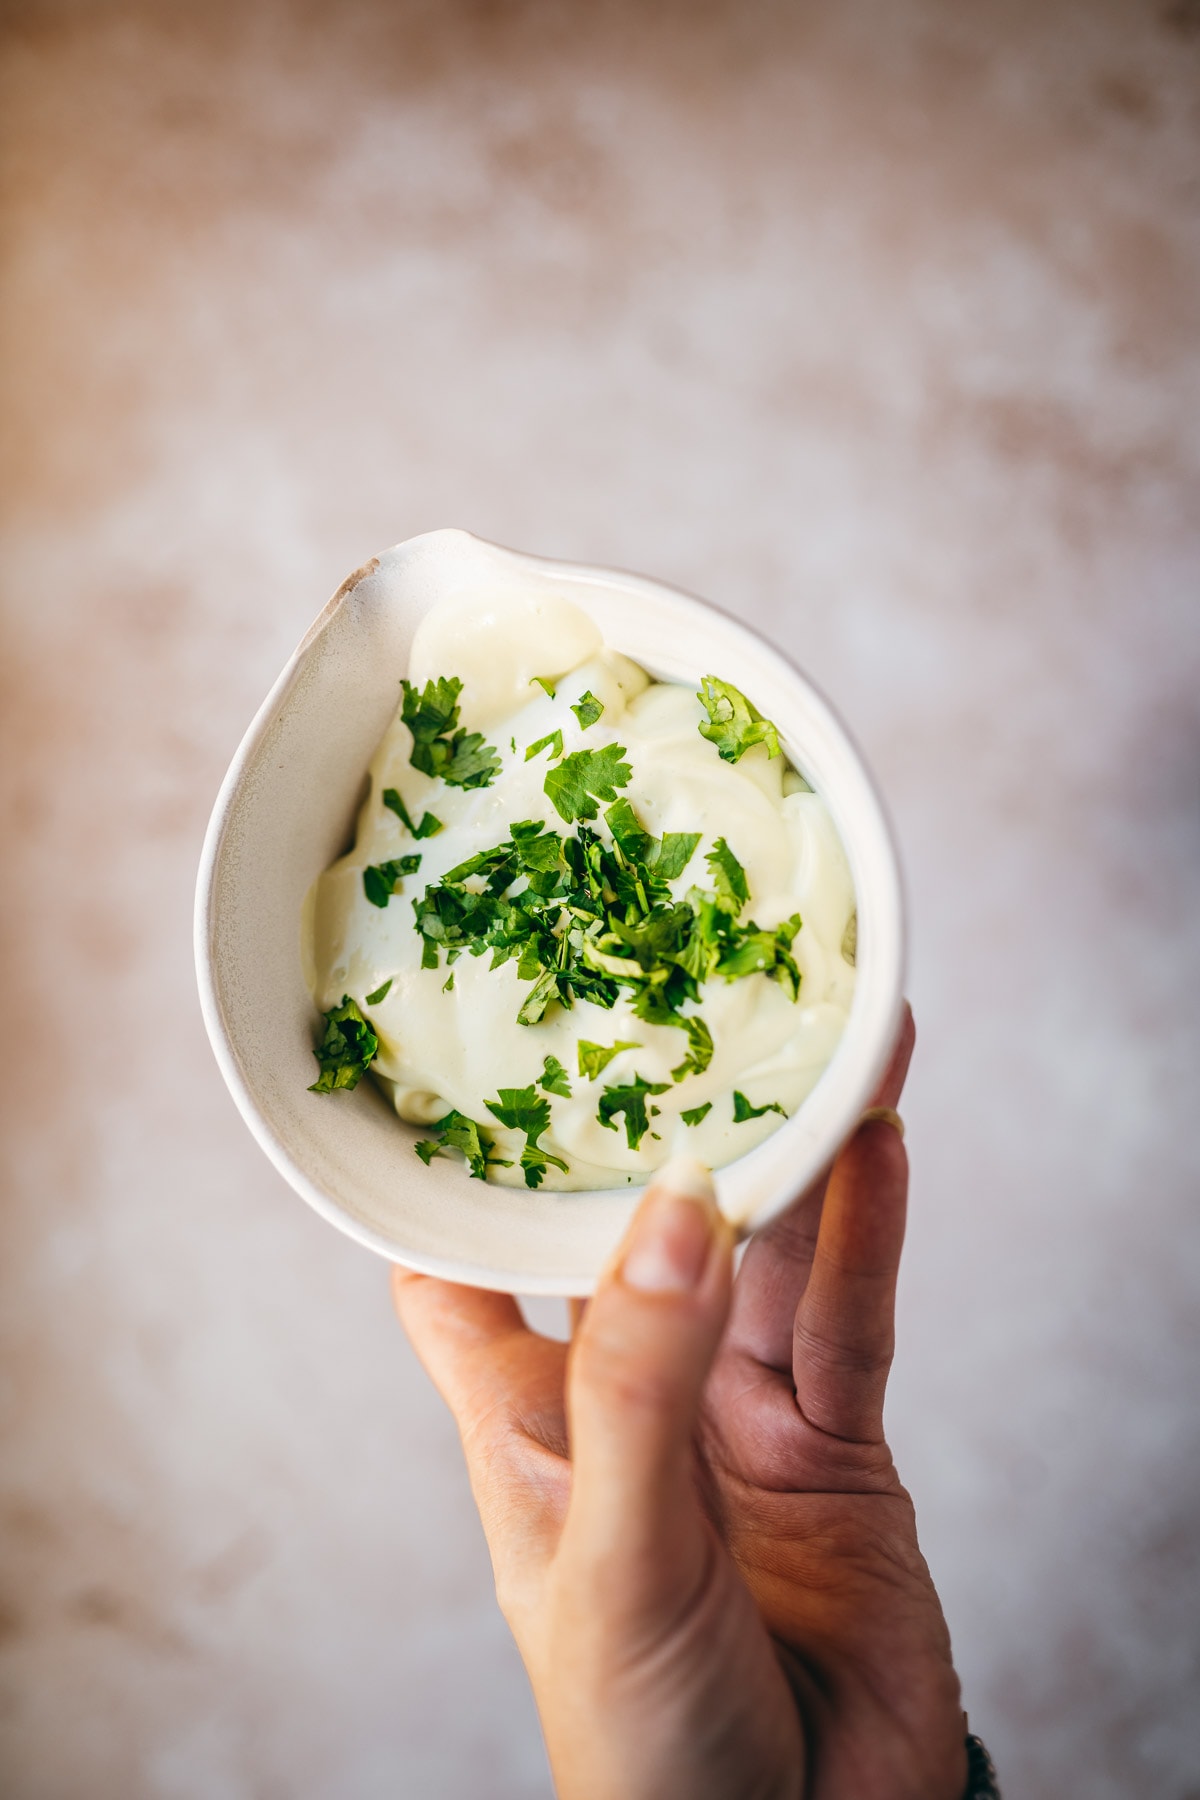 A hand holding a white ceramic bowl of creamy avocado sauce topped with fresh cilantro leaves.